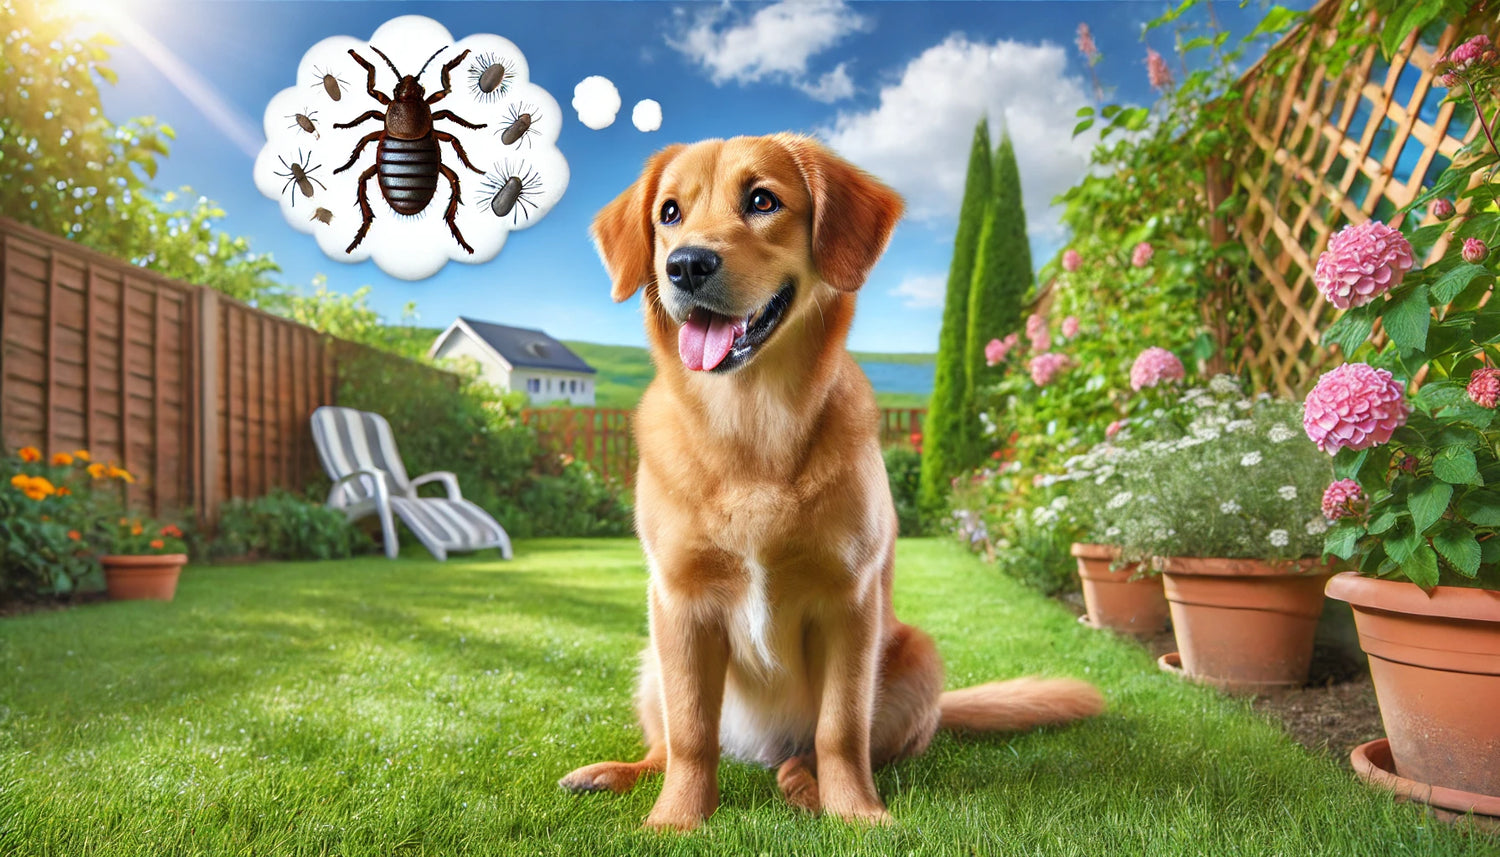 Comprehensive Guide to Flea and Tick Prevention for Dogs